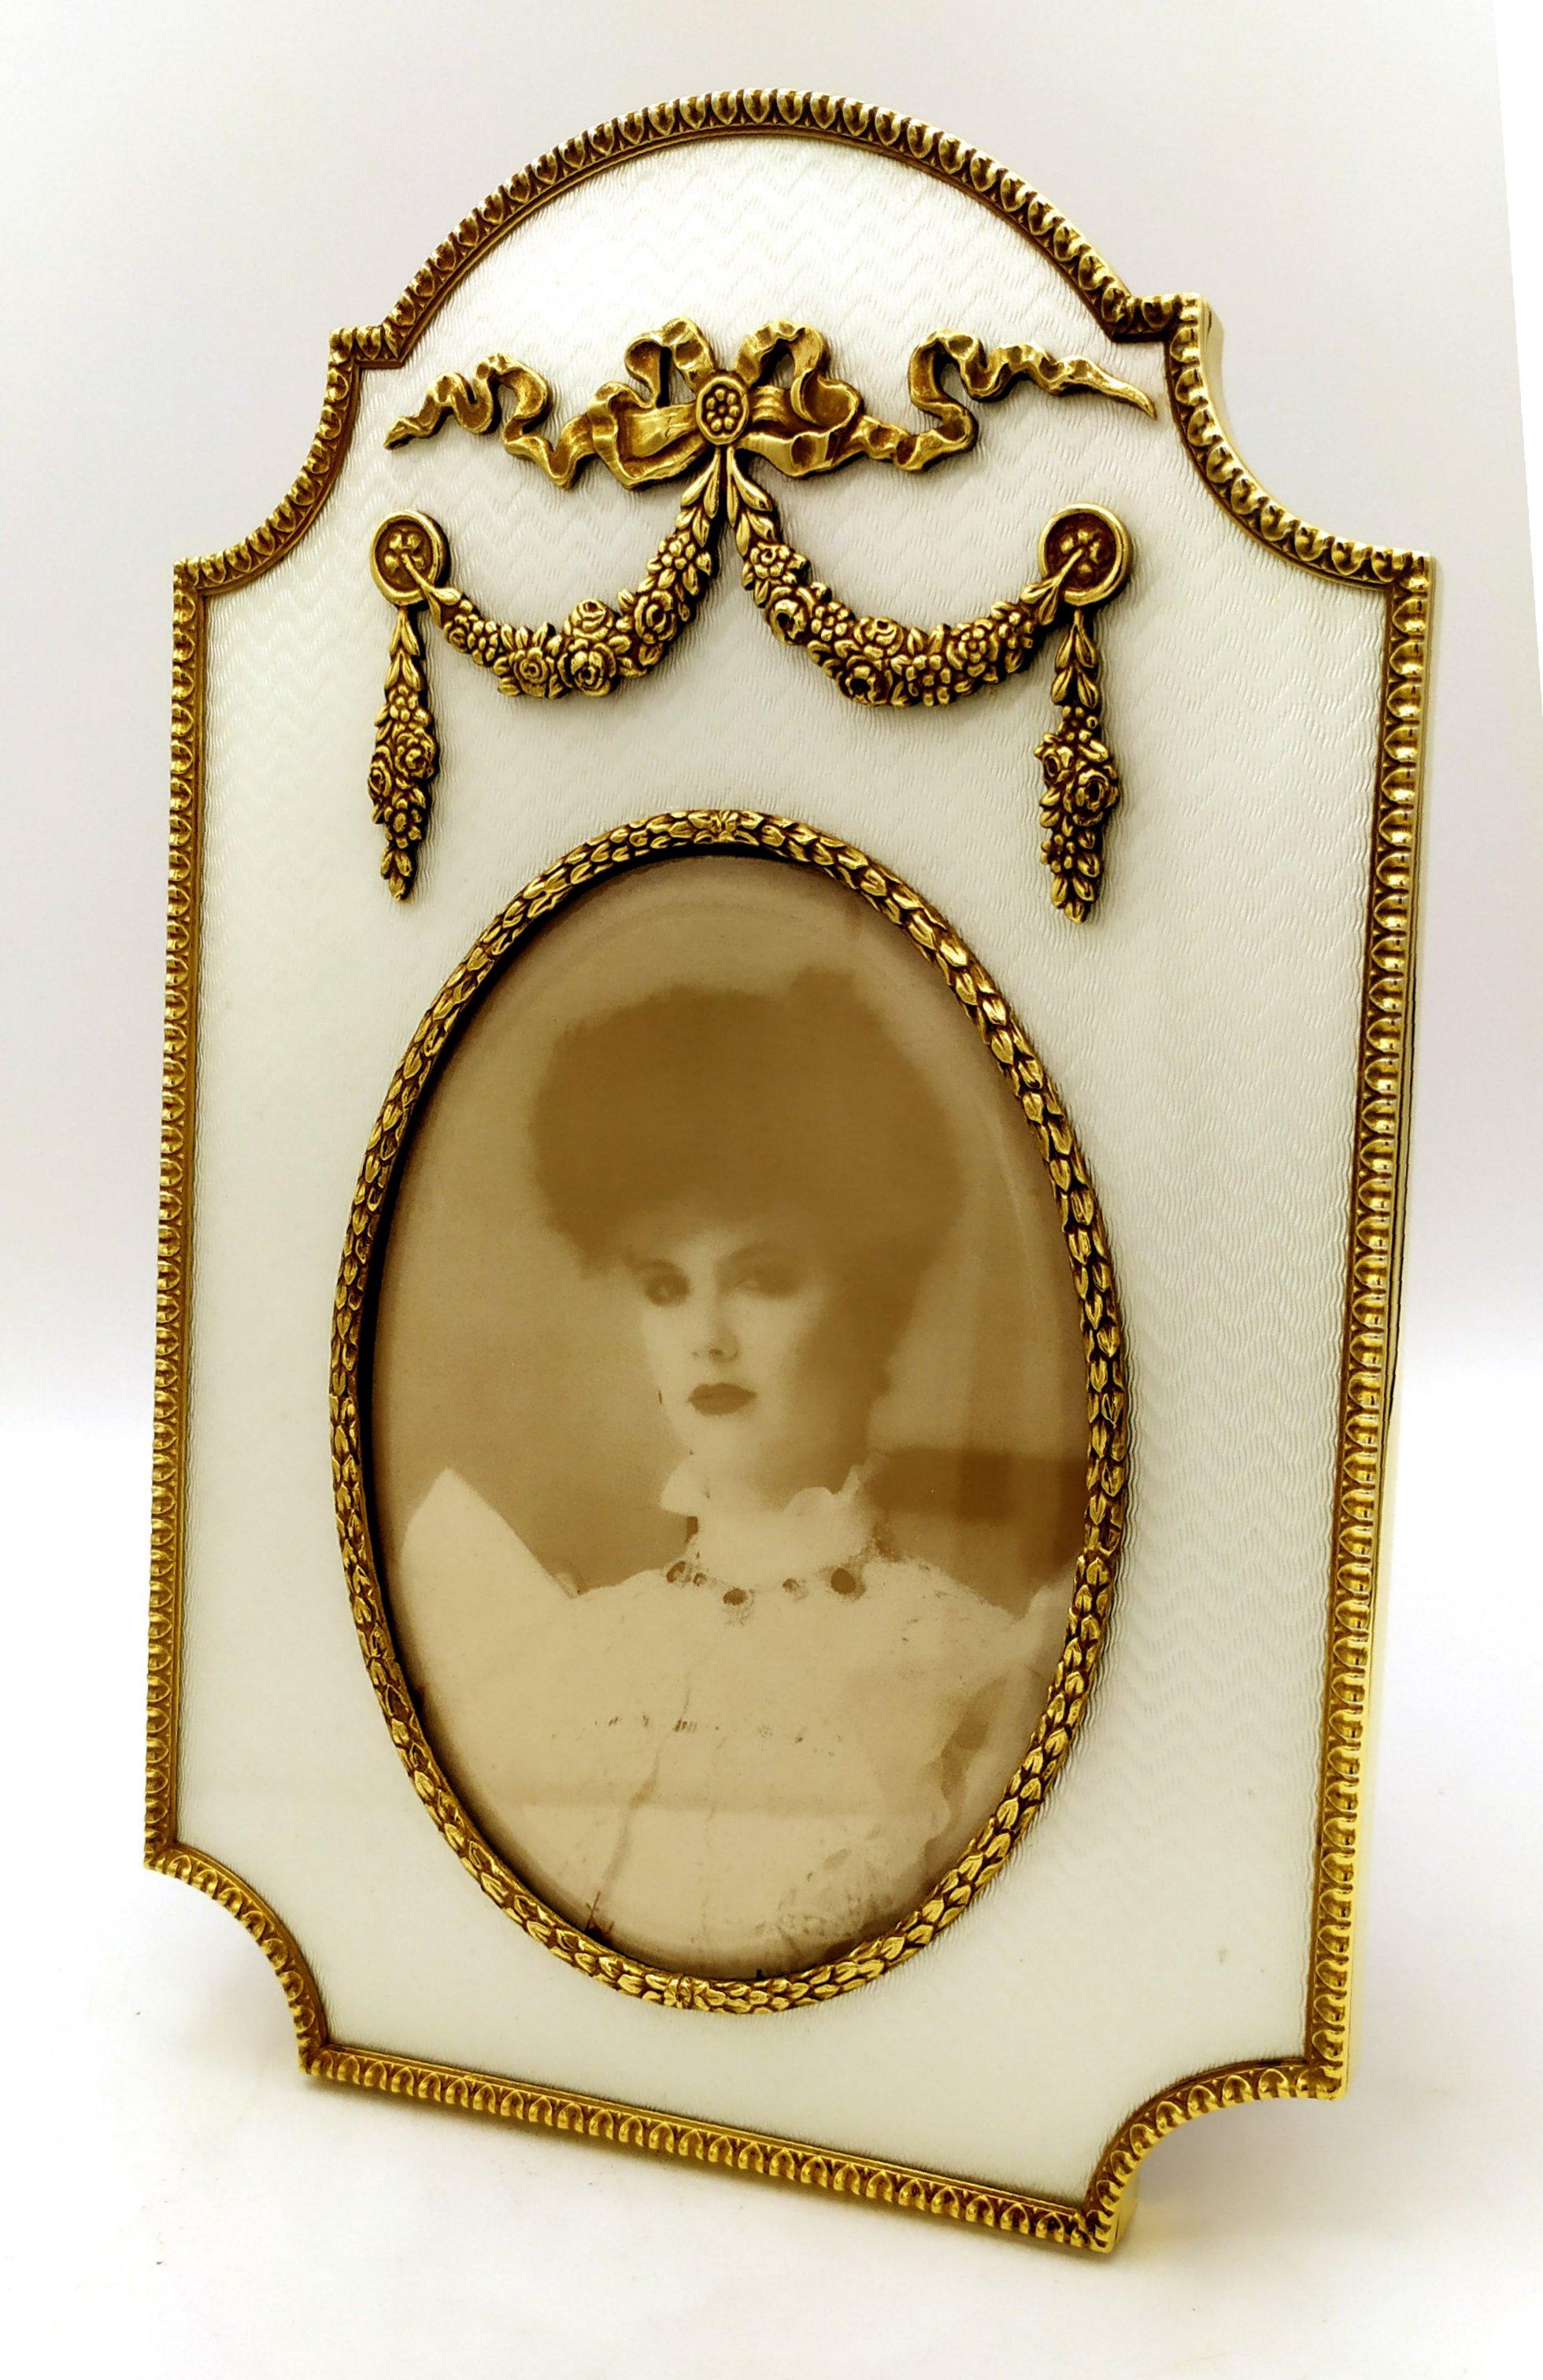 Hand-Carved Photograph Frame Large Imperial Style White Enamel on Sterling Silver Salimbeni For Sale